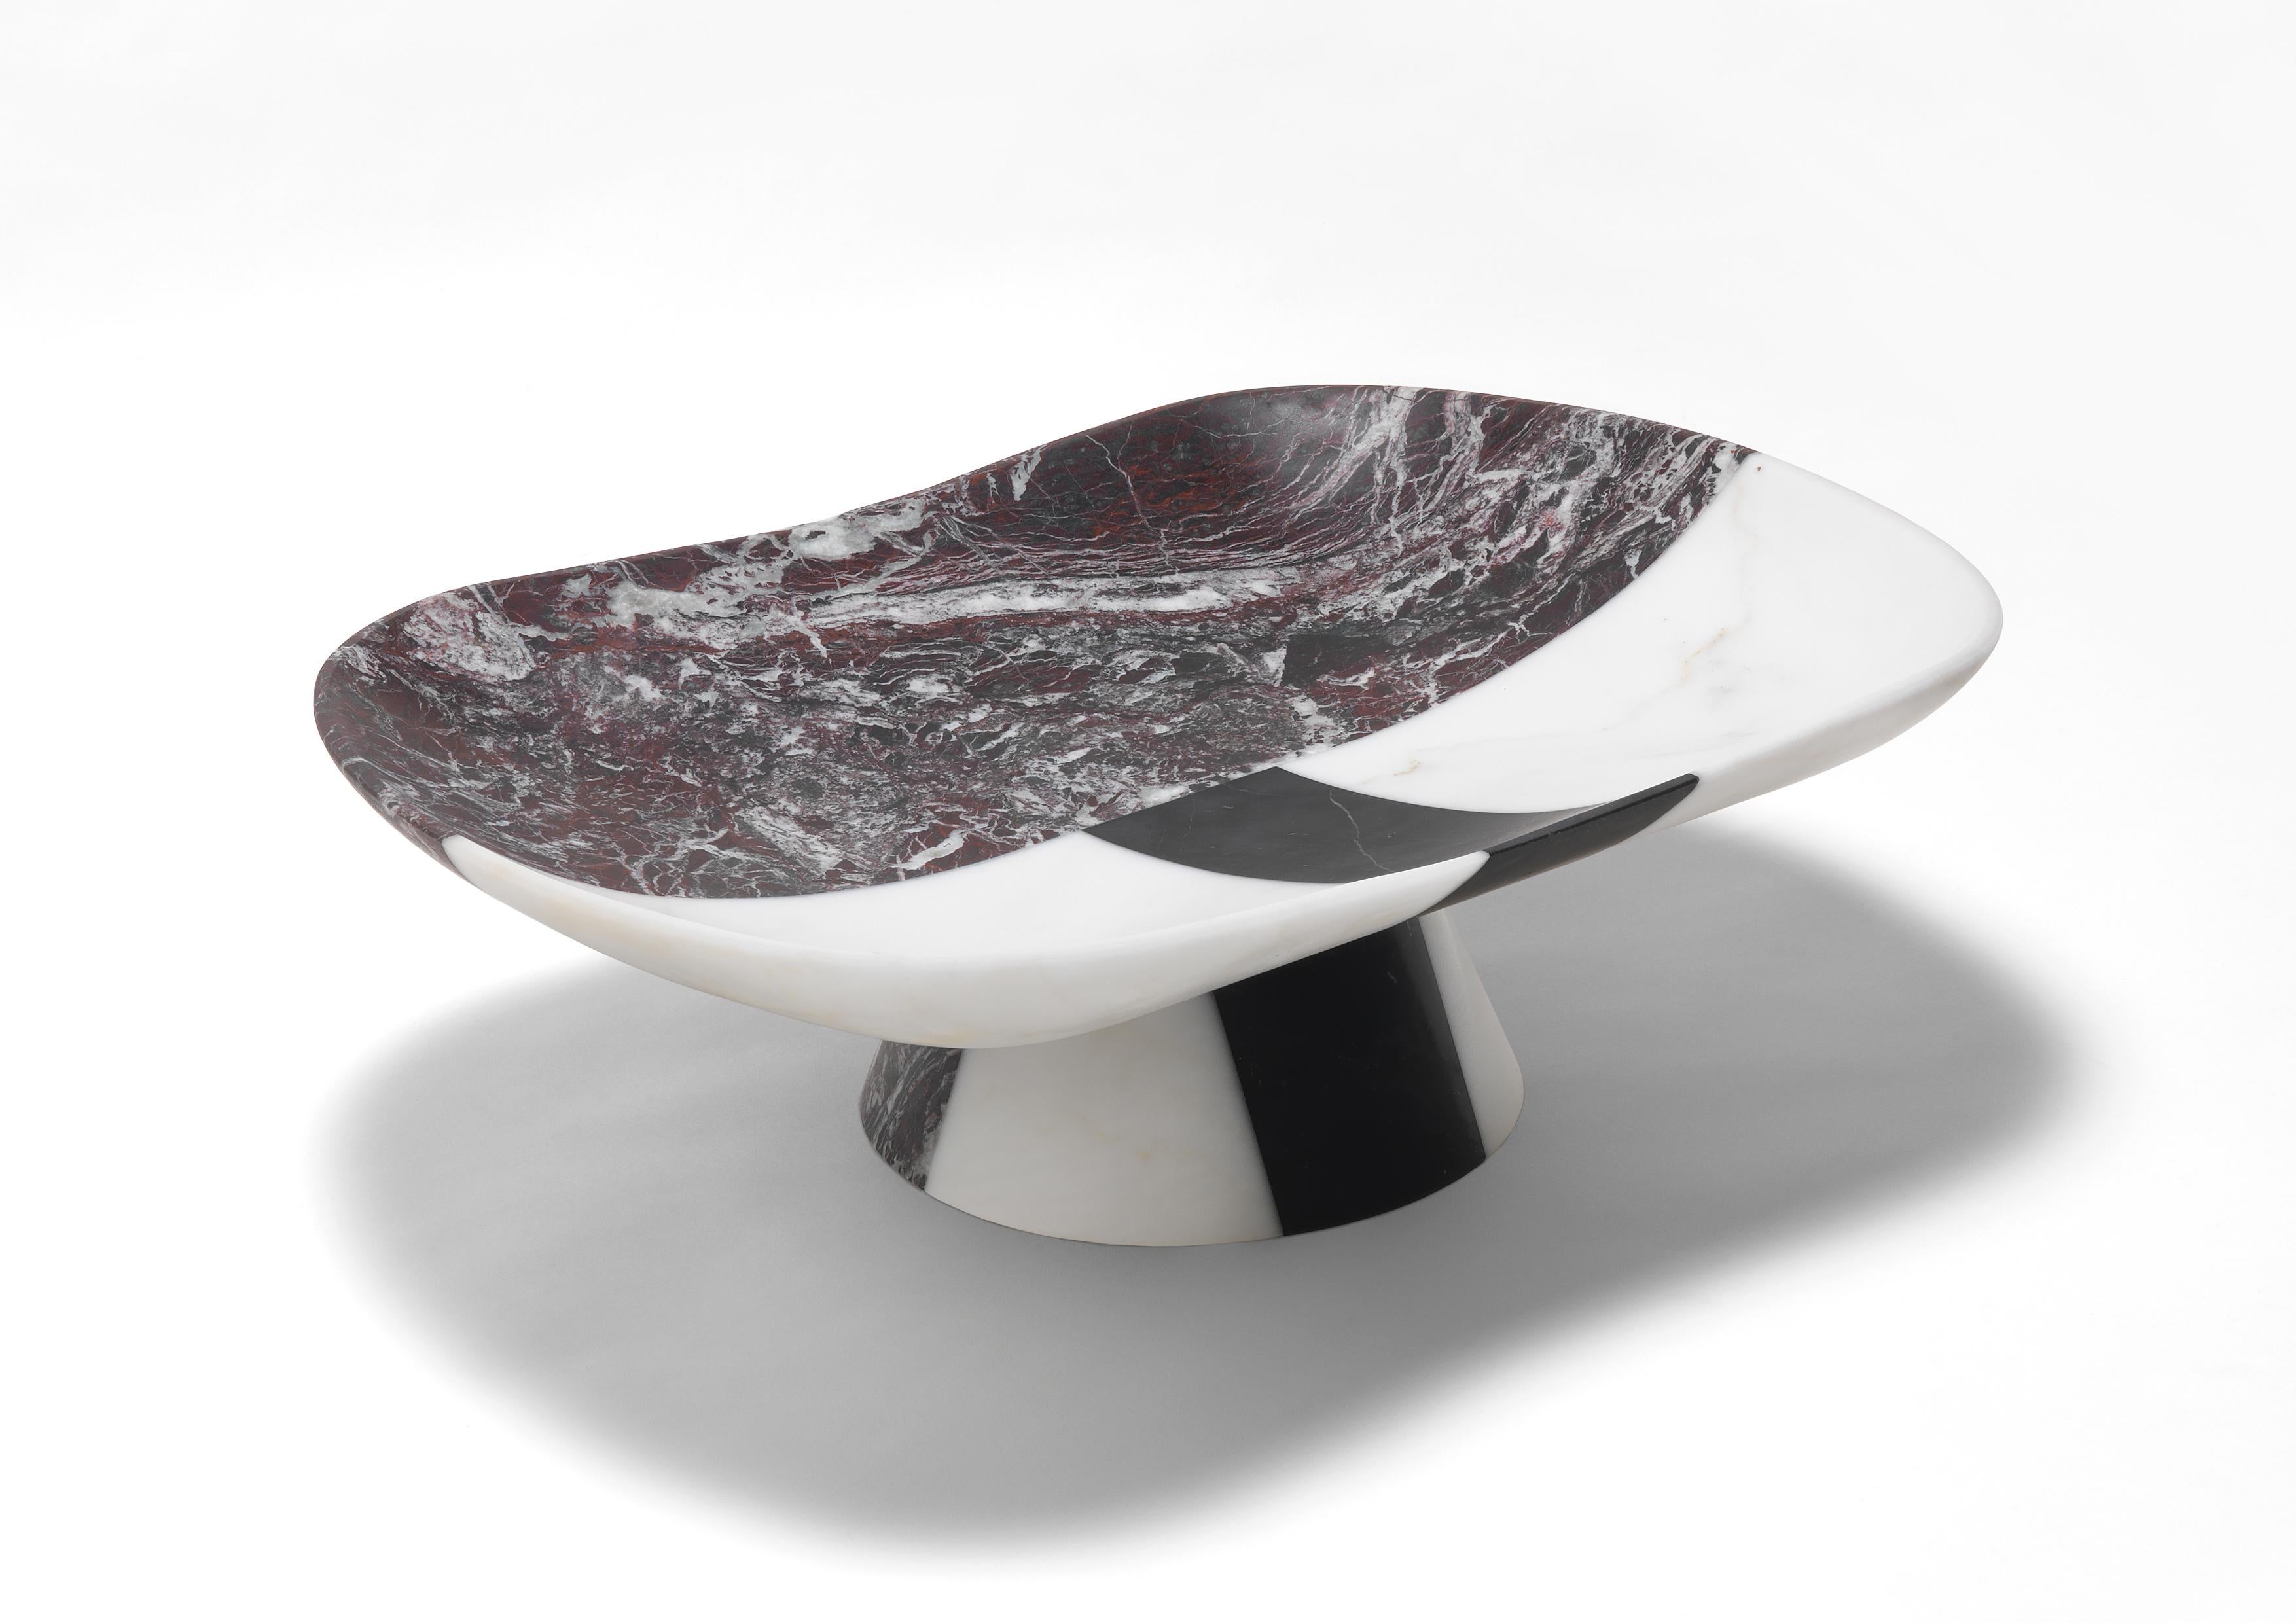 Orazio marble centerpiece by Matteo Cibic
Dimensions: 18.9 x 14 x 5.8 cm
Materials: 
Bianco
Michelangelo,
Rosso Levanto,
Nero Marquinia

Please note that the Cibic pieces with “ears” or tray handles are ornamental and not functional. 
Use them can